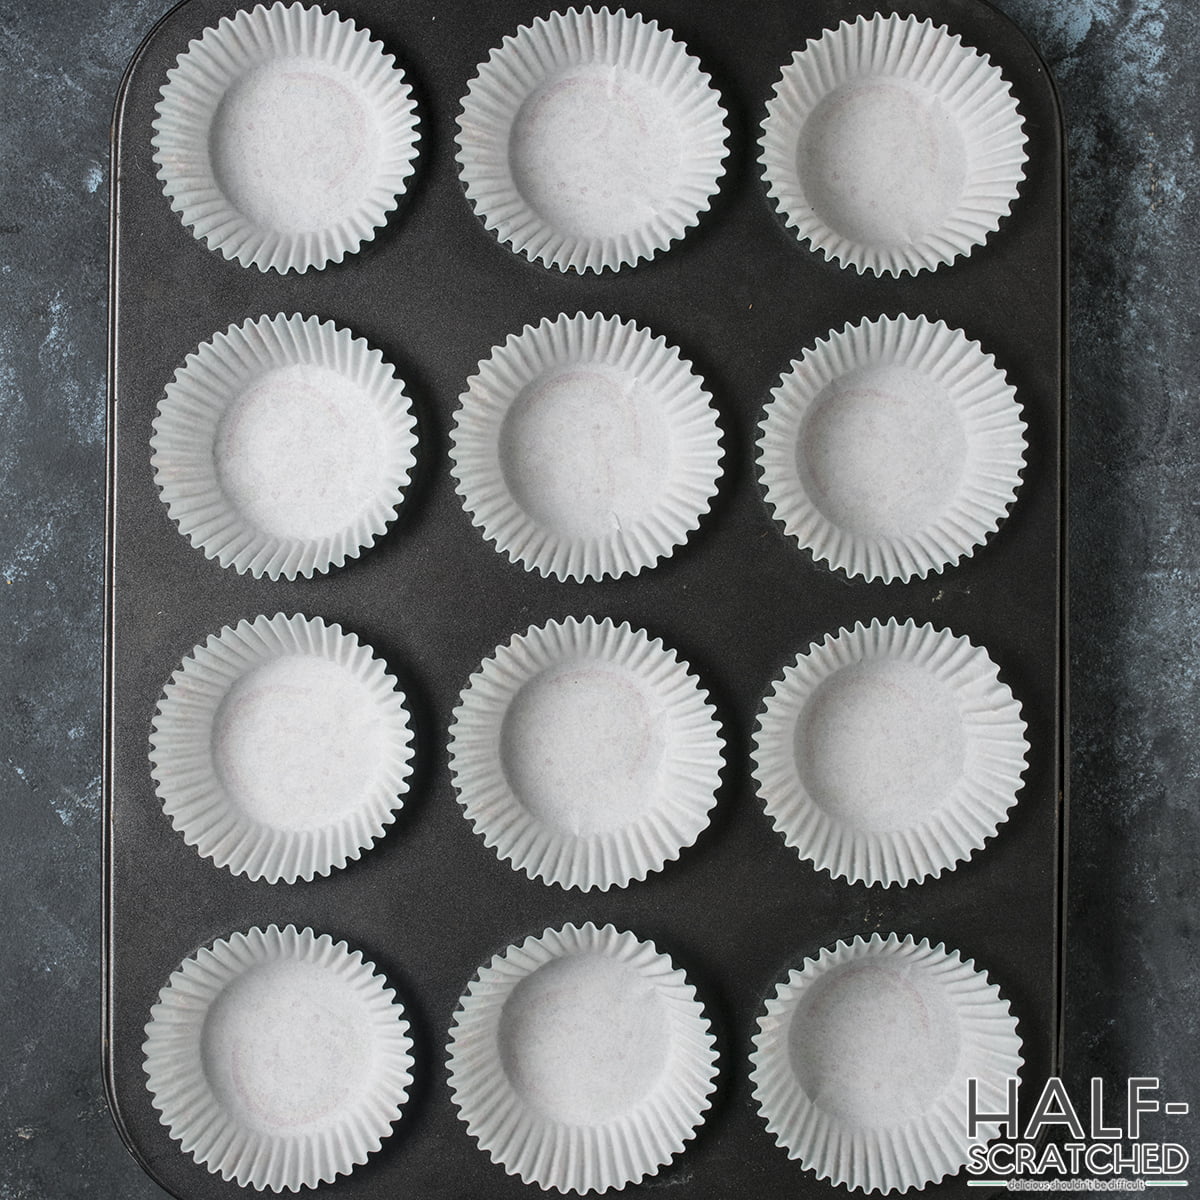 Empty lined muffin pans ready for batter